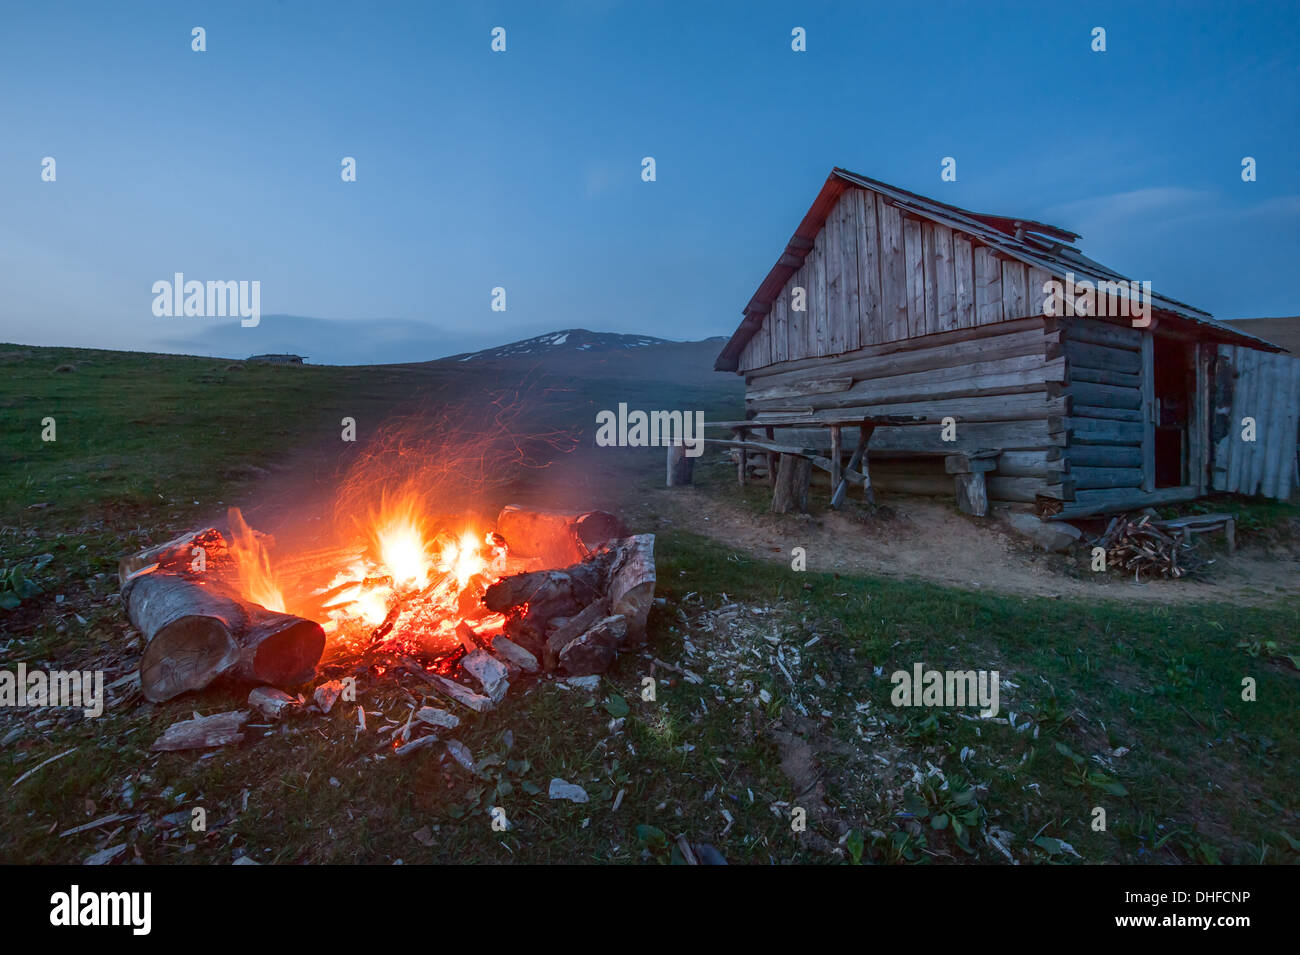 campfire in mountain near hunting house Stock Photo